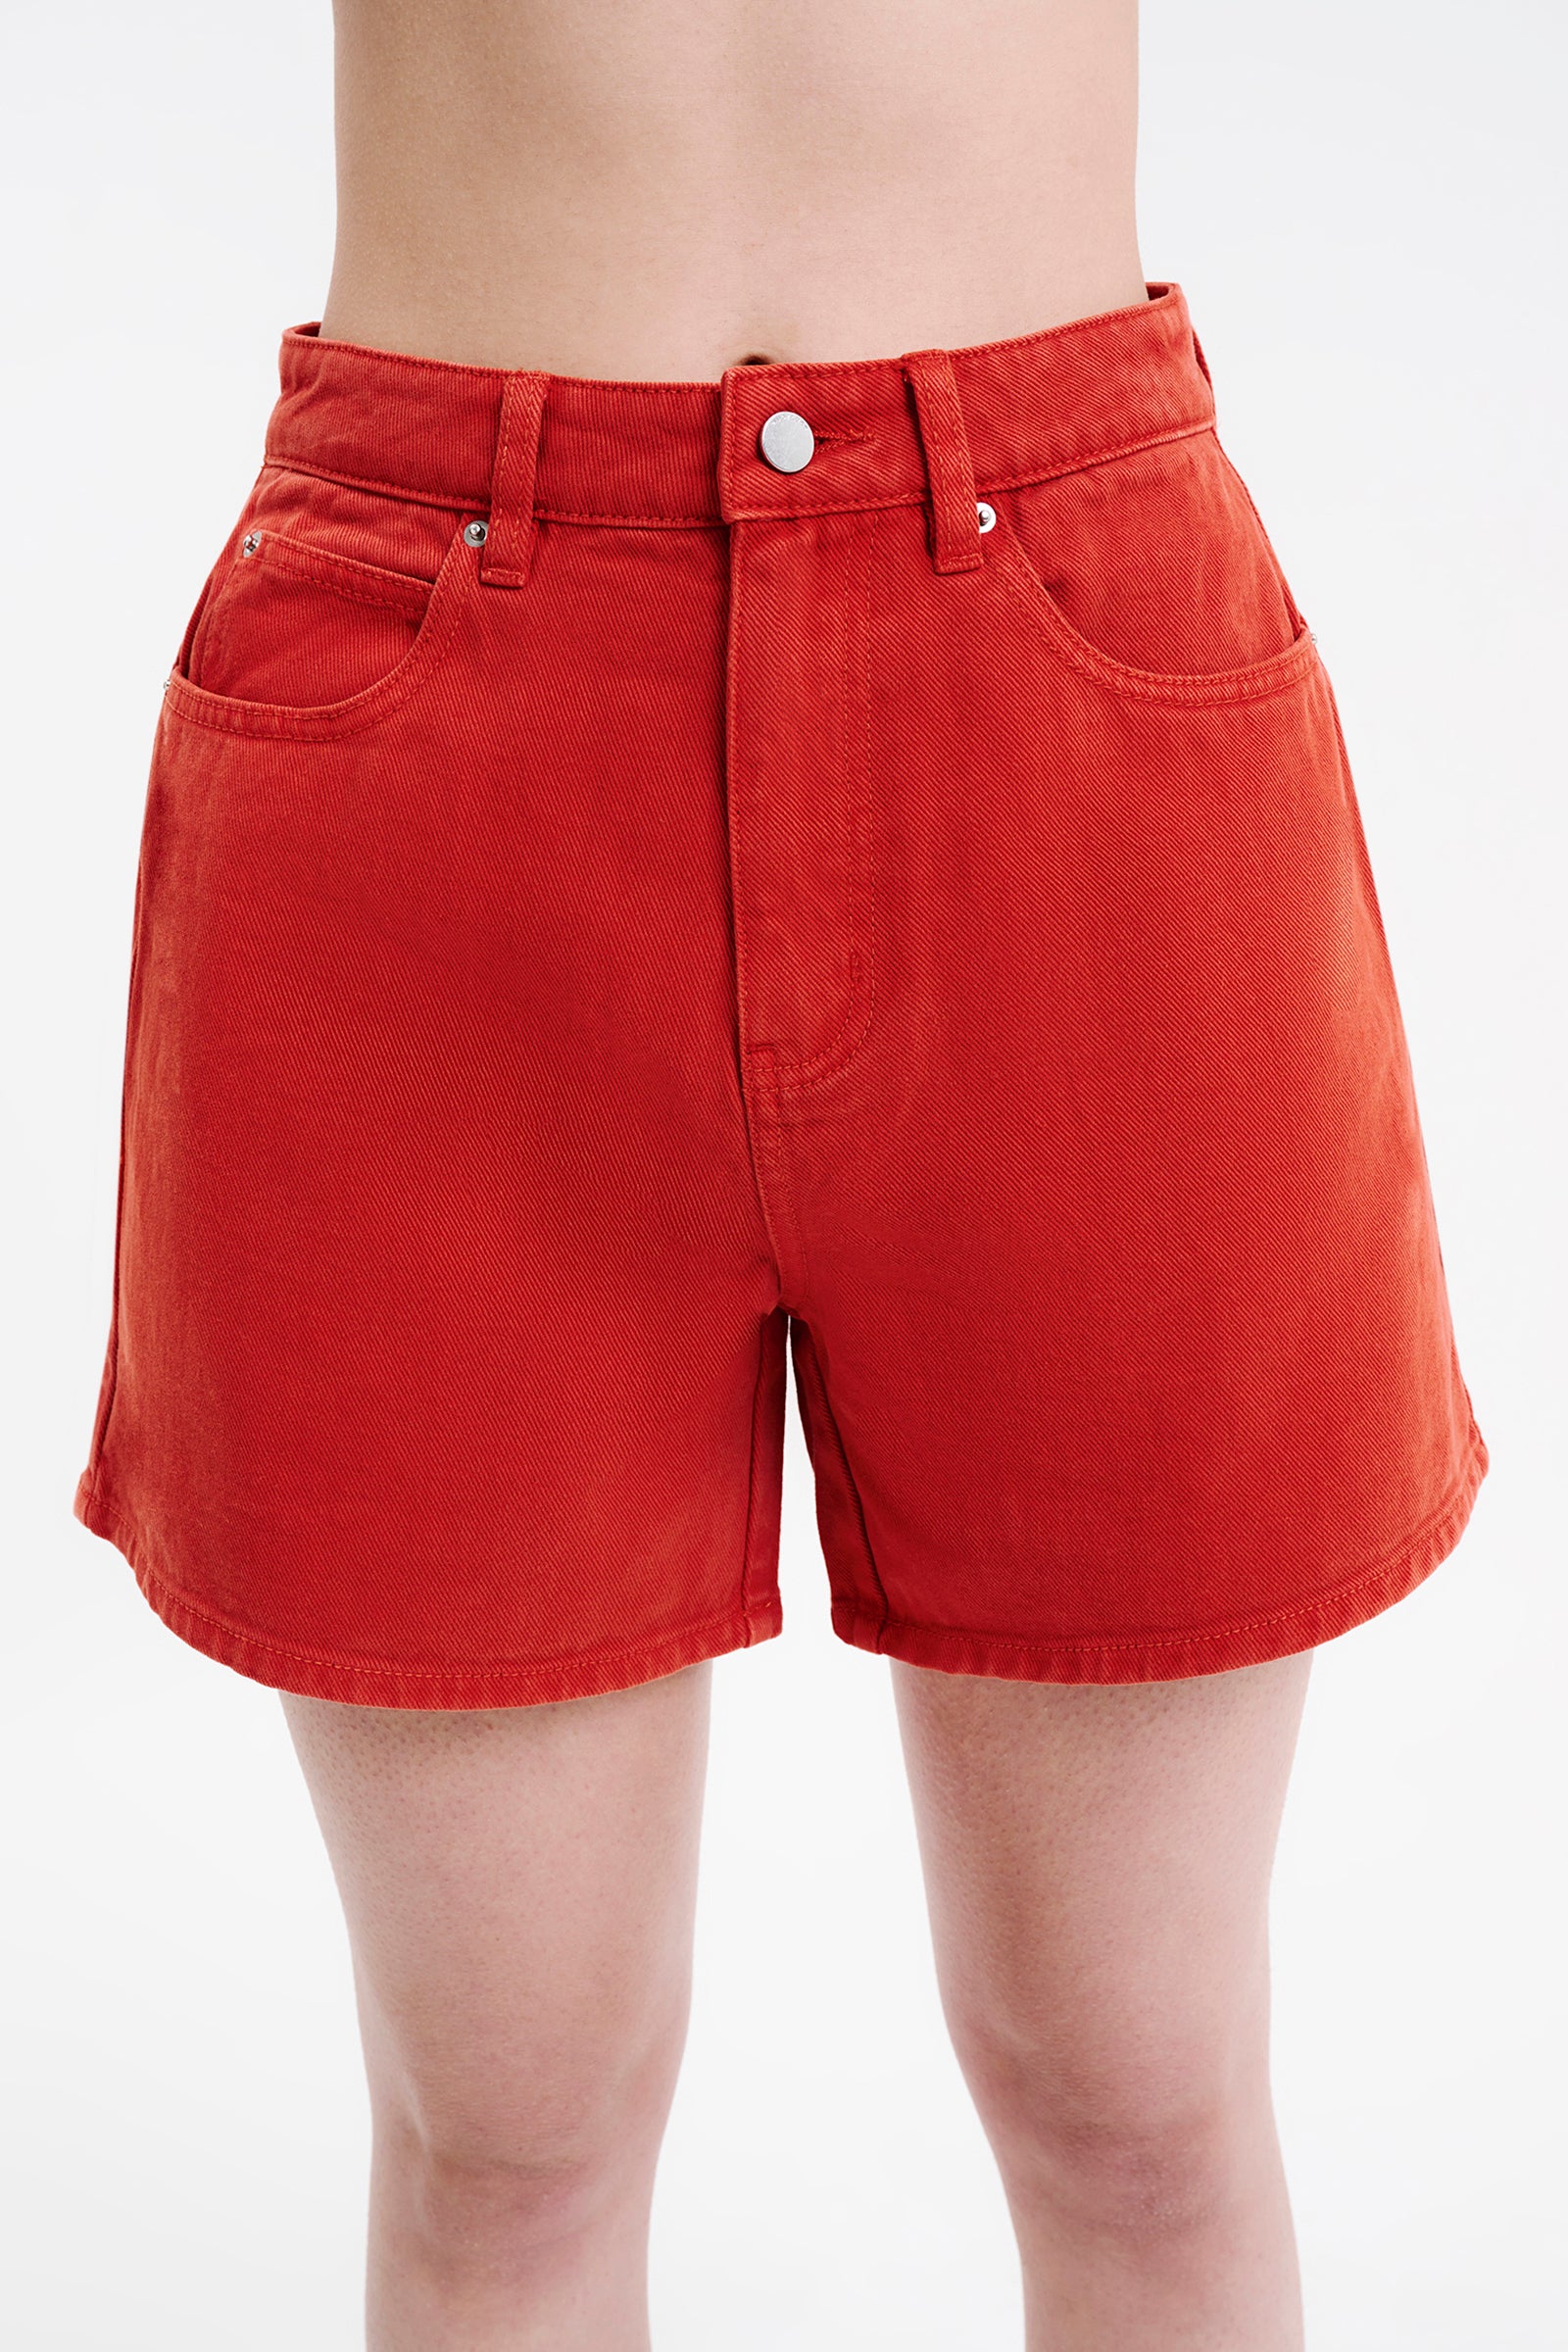 Nude Lucy Blaise Short in a Pink & Orange Toned Coral Colour